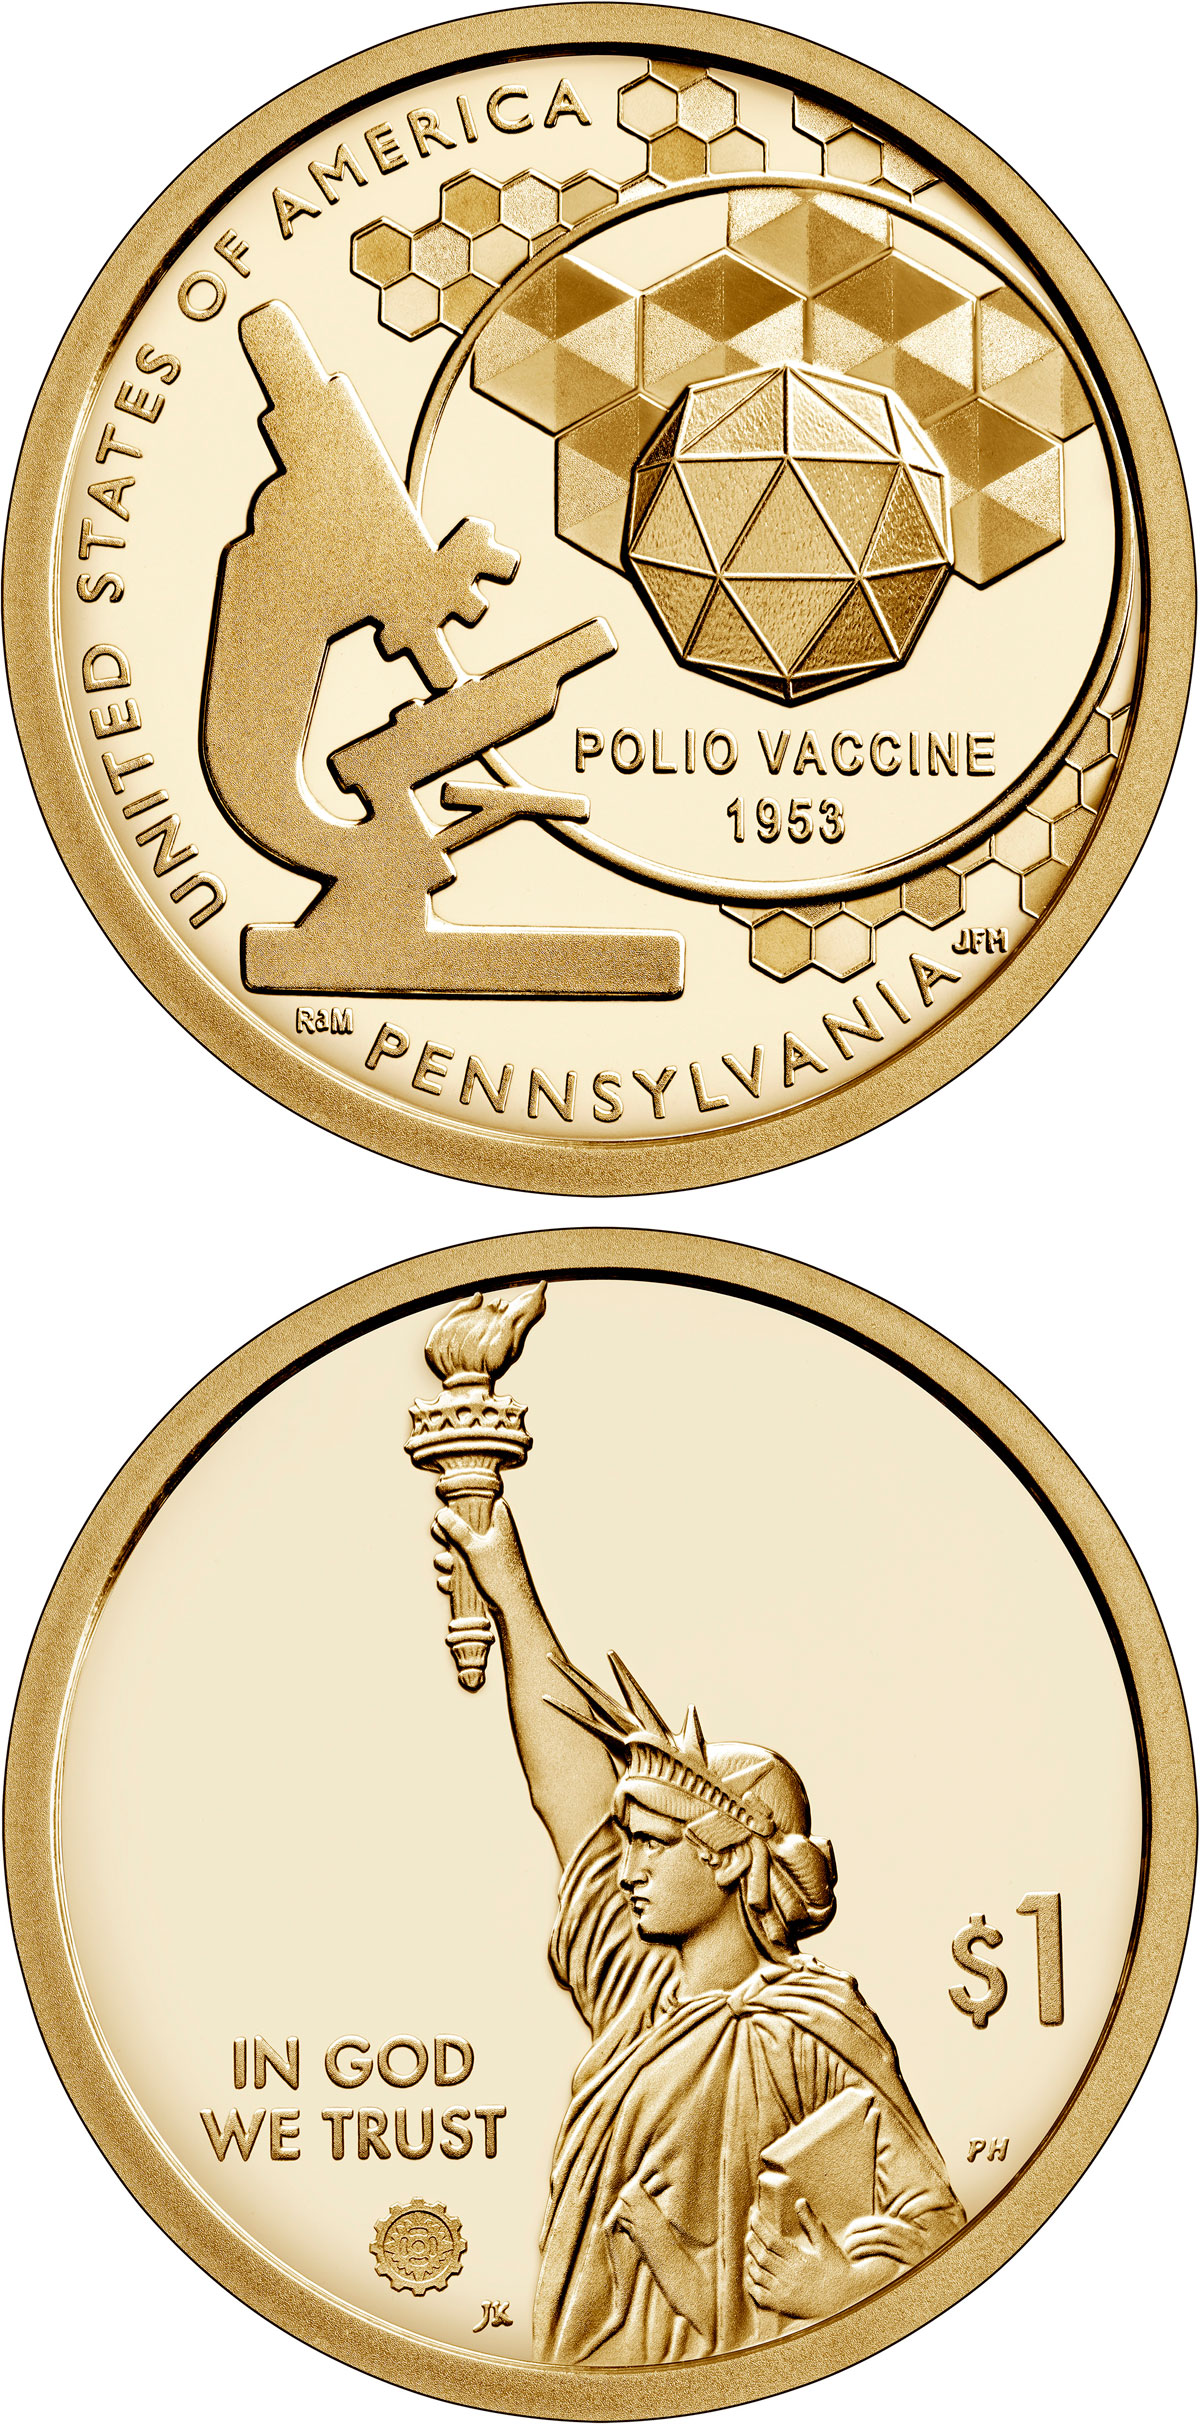 Image of 1 dollar coin - Pennsylvania - The creation of a vaccine to prevent polio | USA 2019.  The Nordic gold (CuZnAl) coin is of Proof, BU, UNC quality.